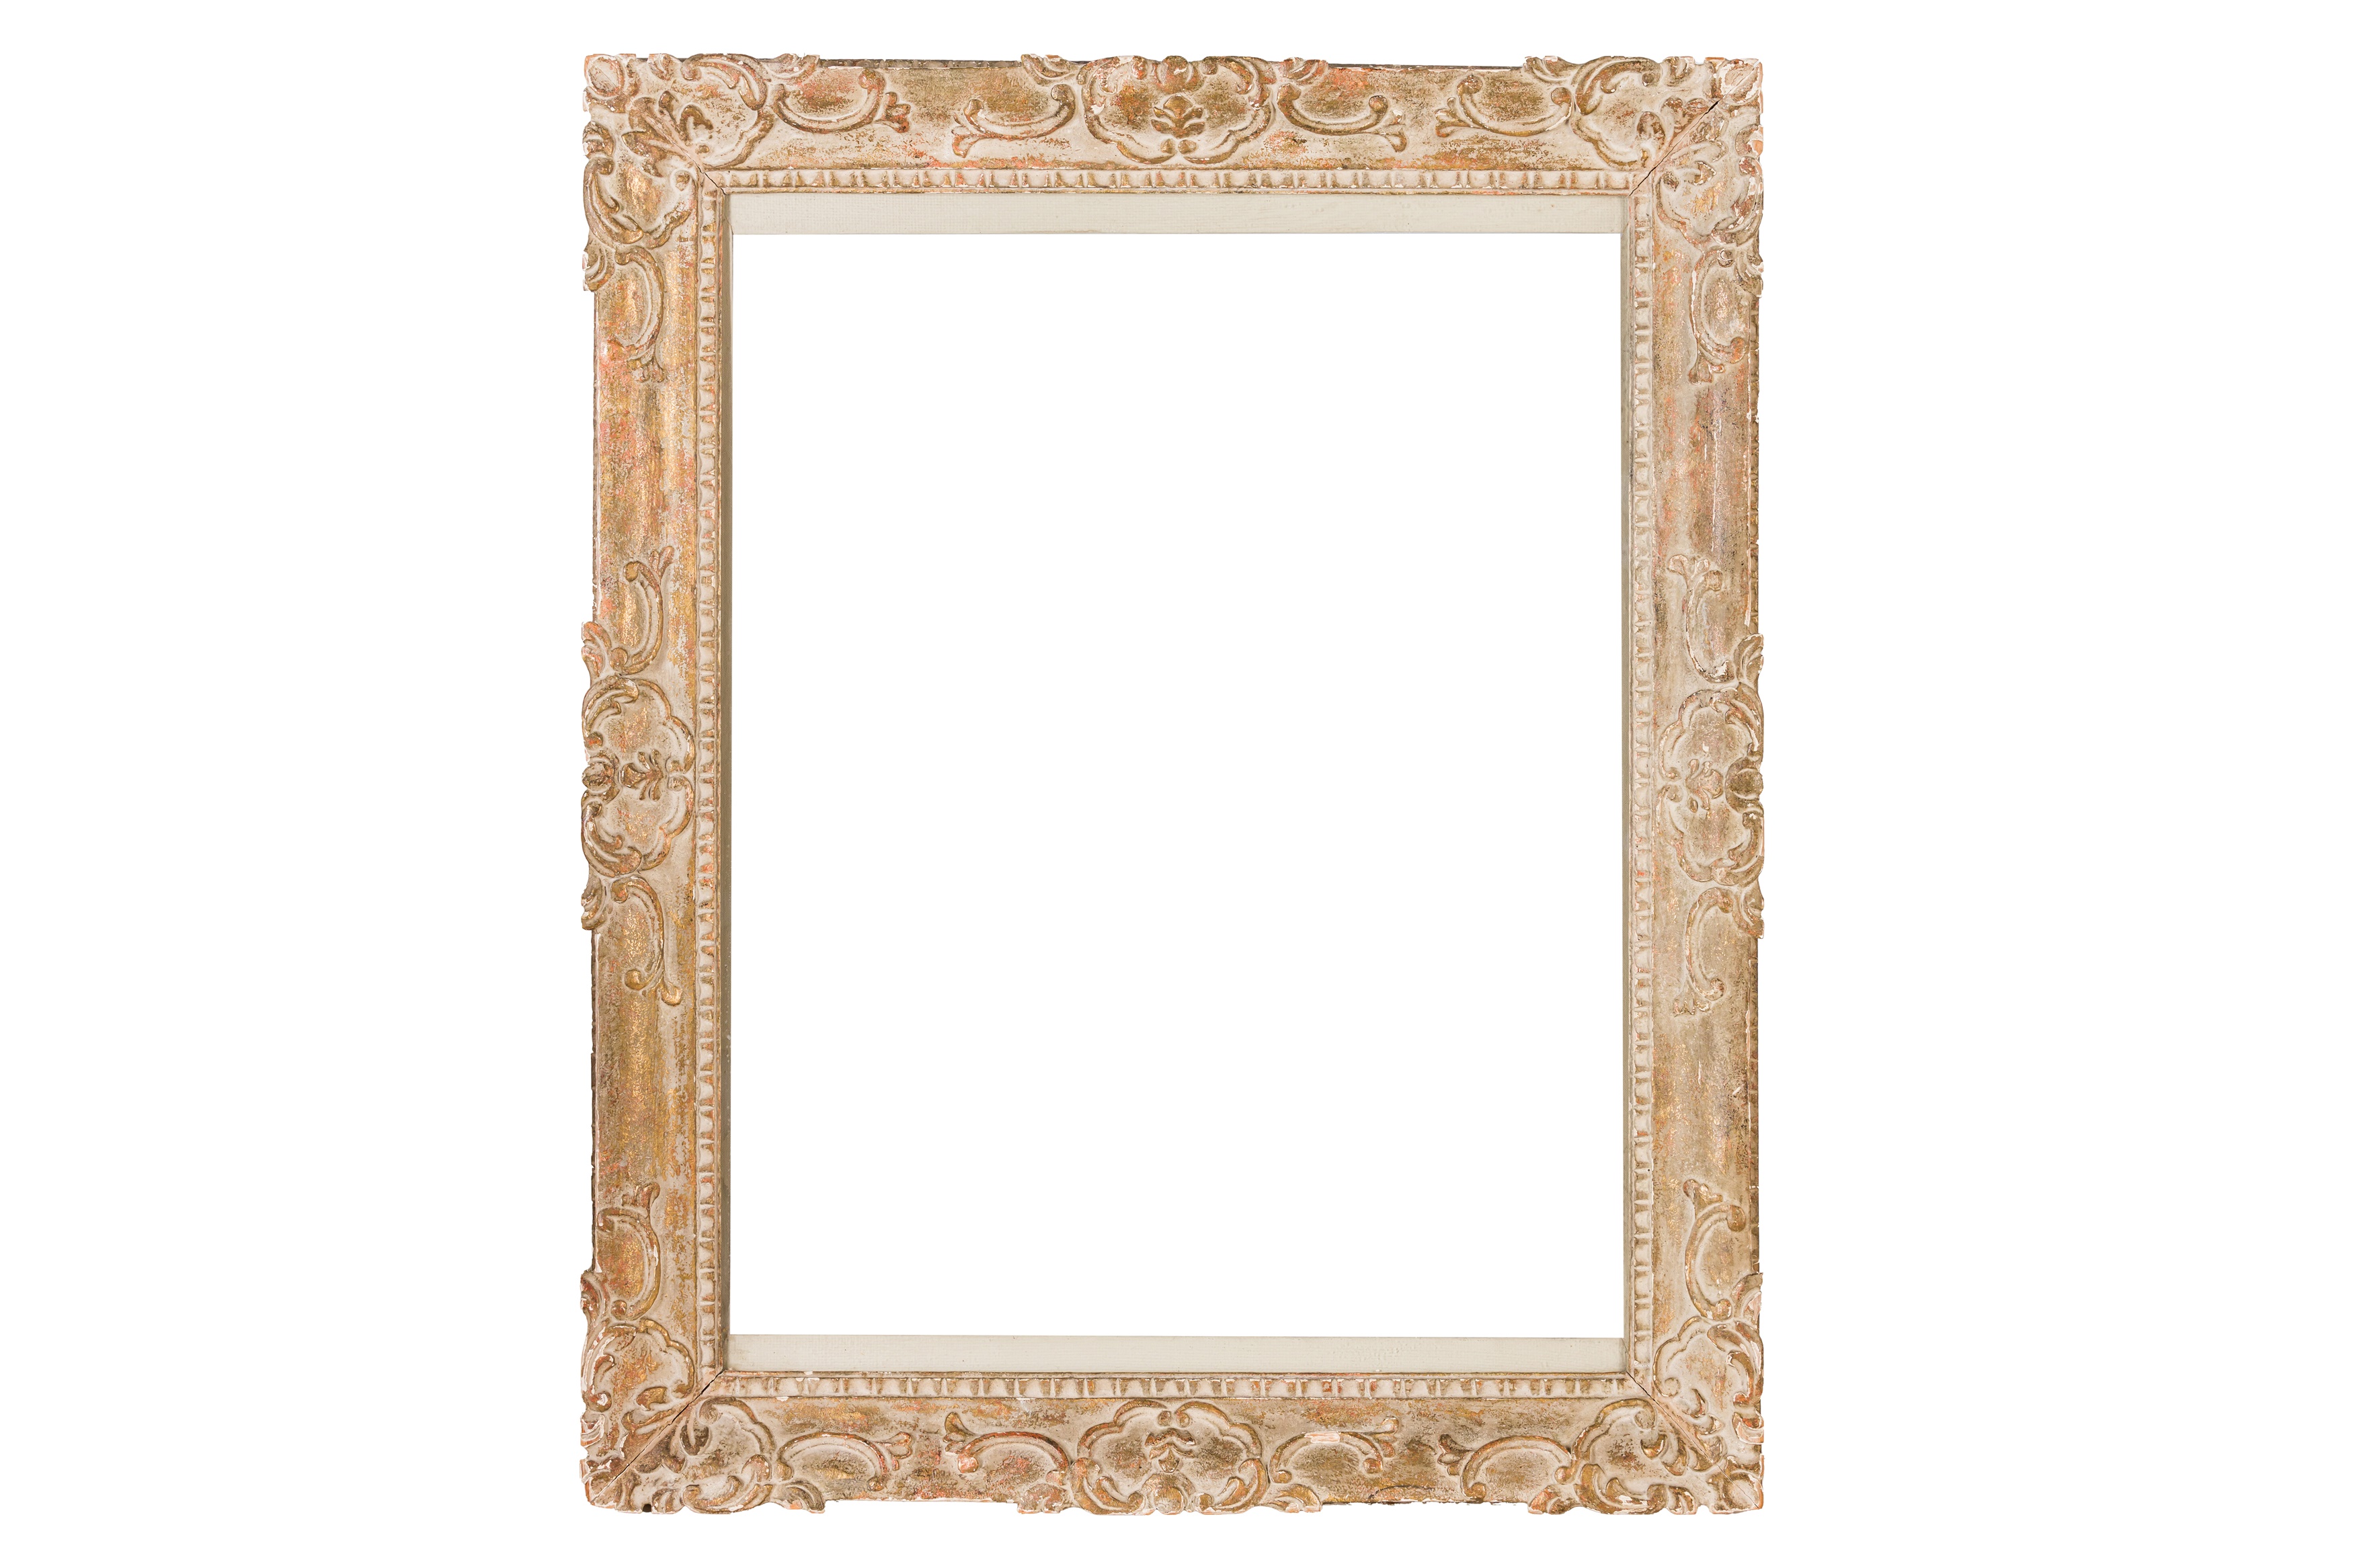 A LOUIS XIV STYLE CARVED AND GILDED FRAME With dentil sight, taenia, plain frieze, leaf cartouche